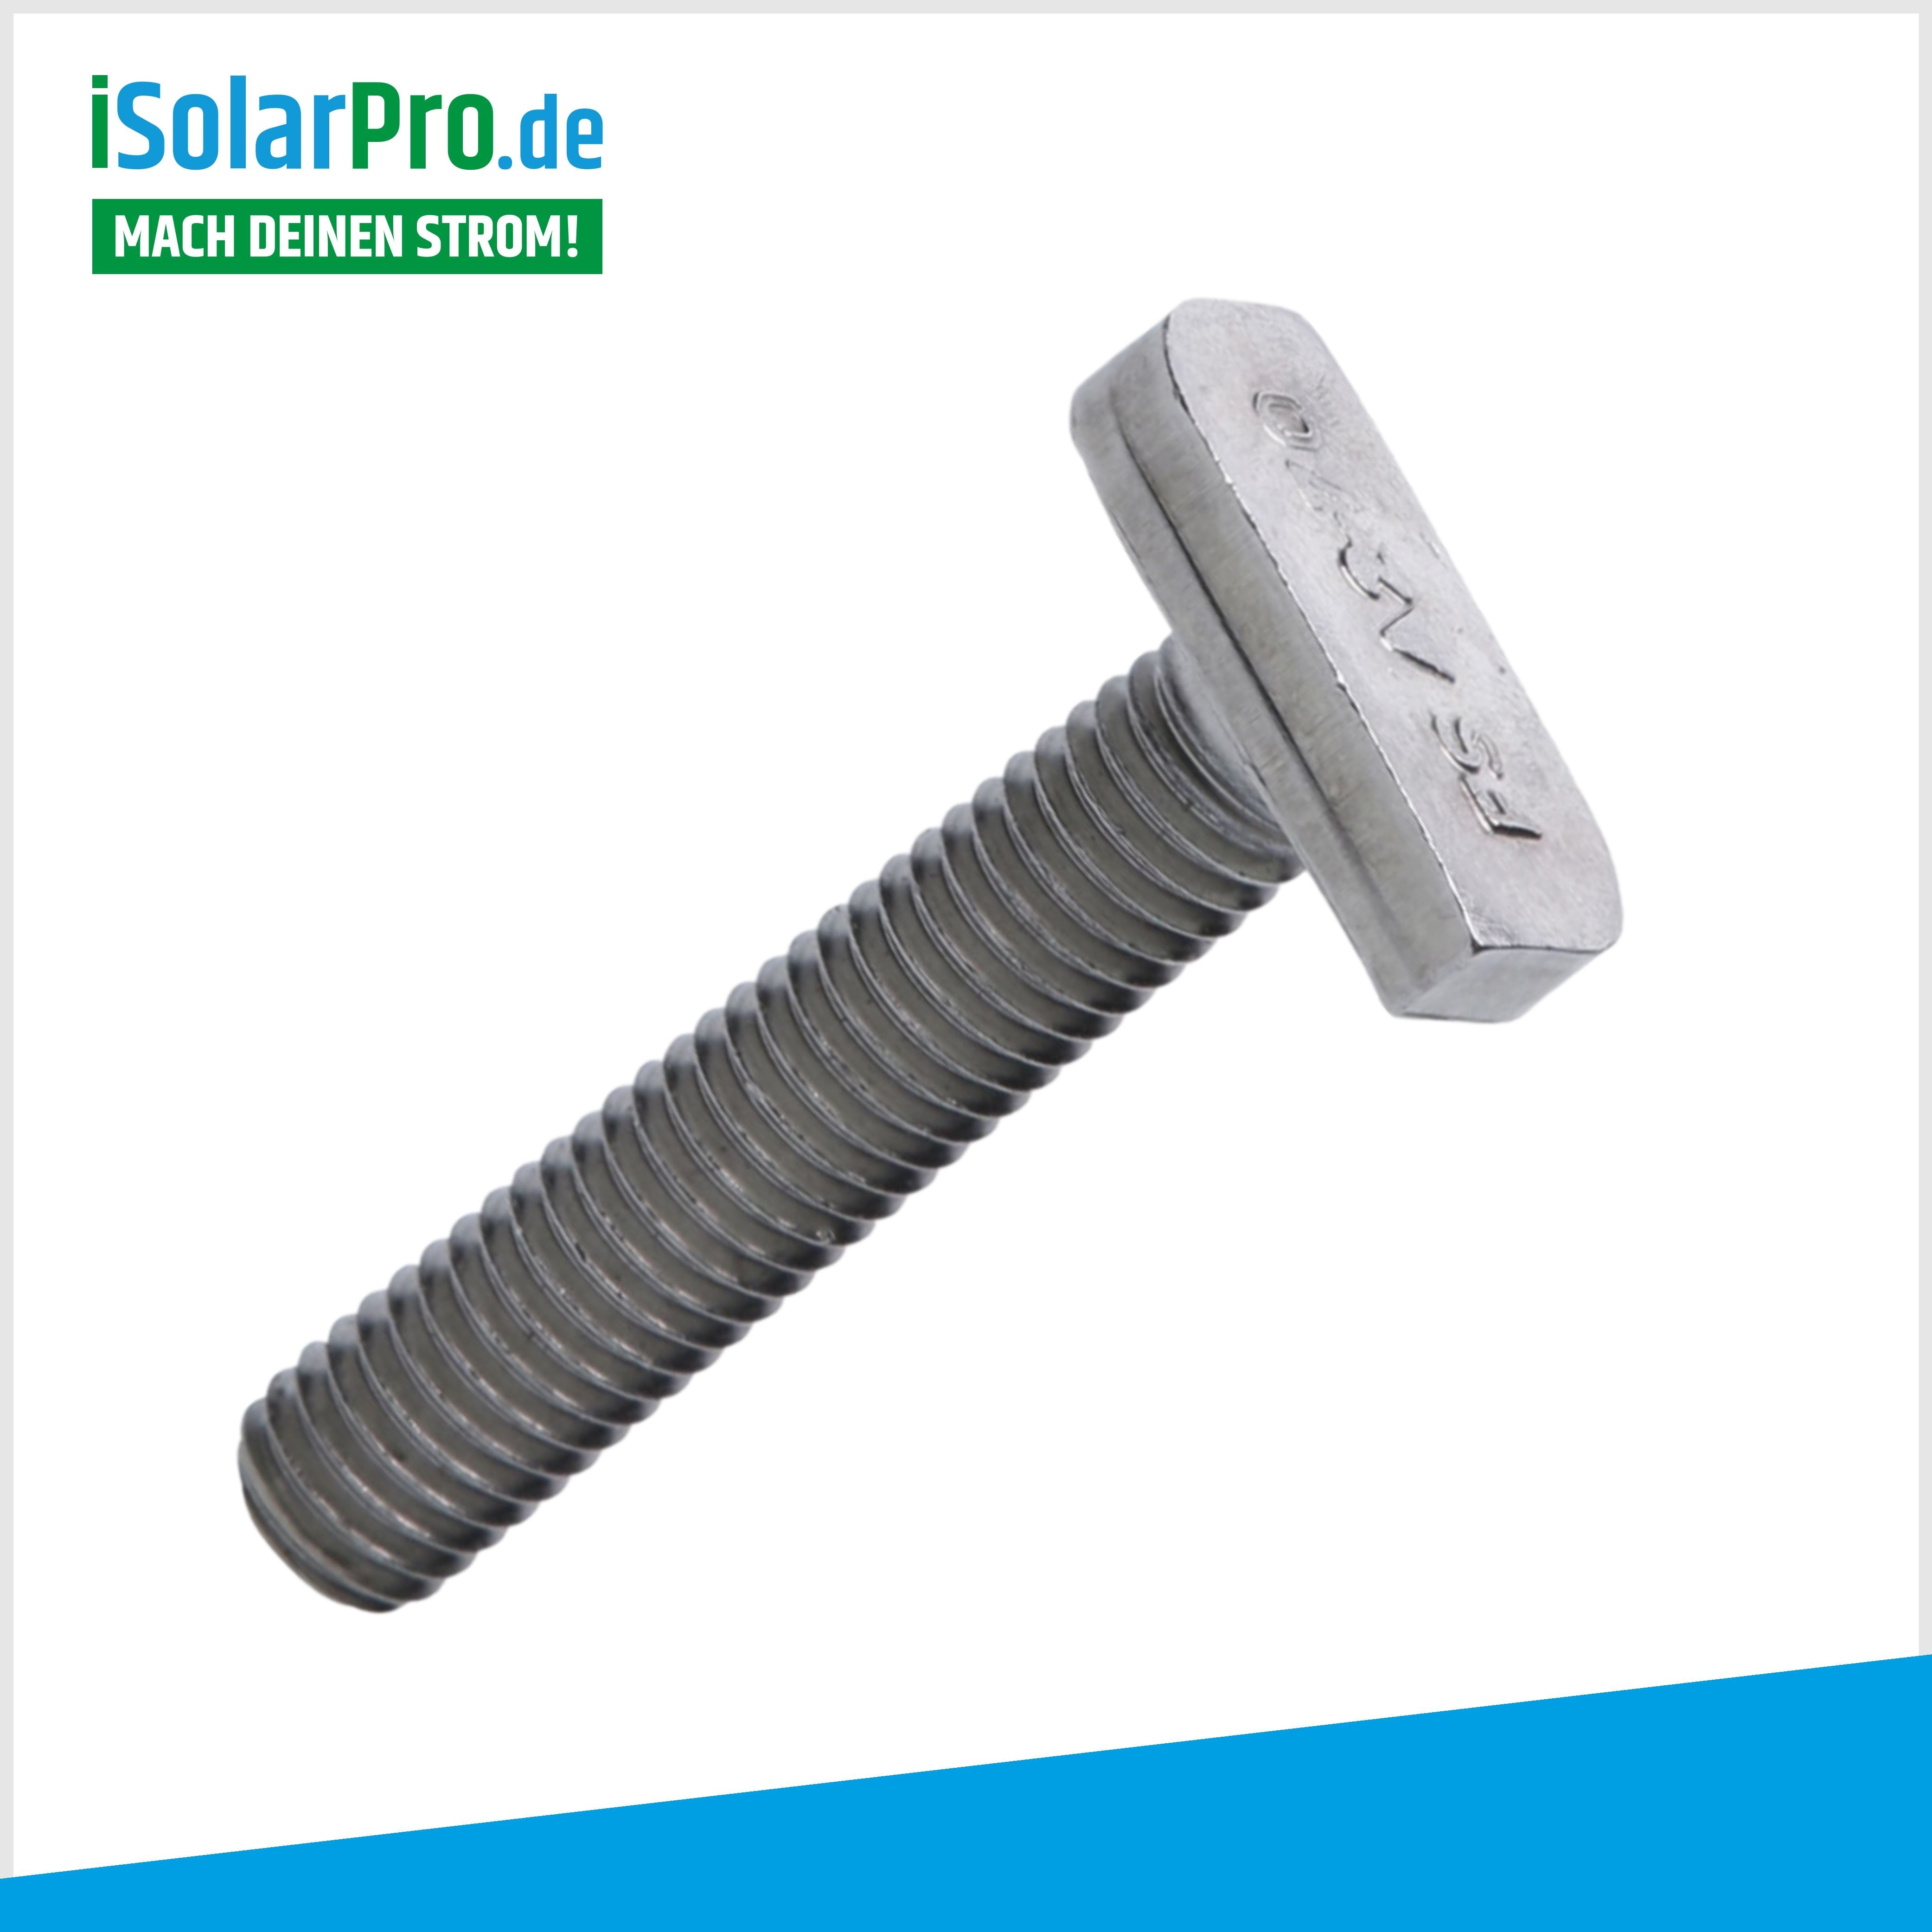 Roof mounting set for 2x solar panels 30mm, vertical 1-row installation, tiled roof